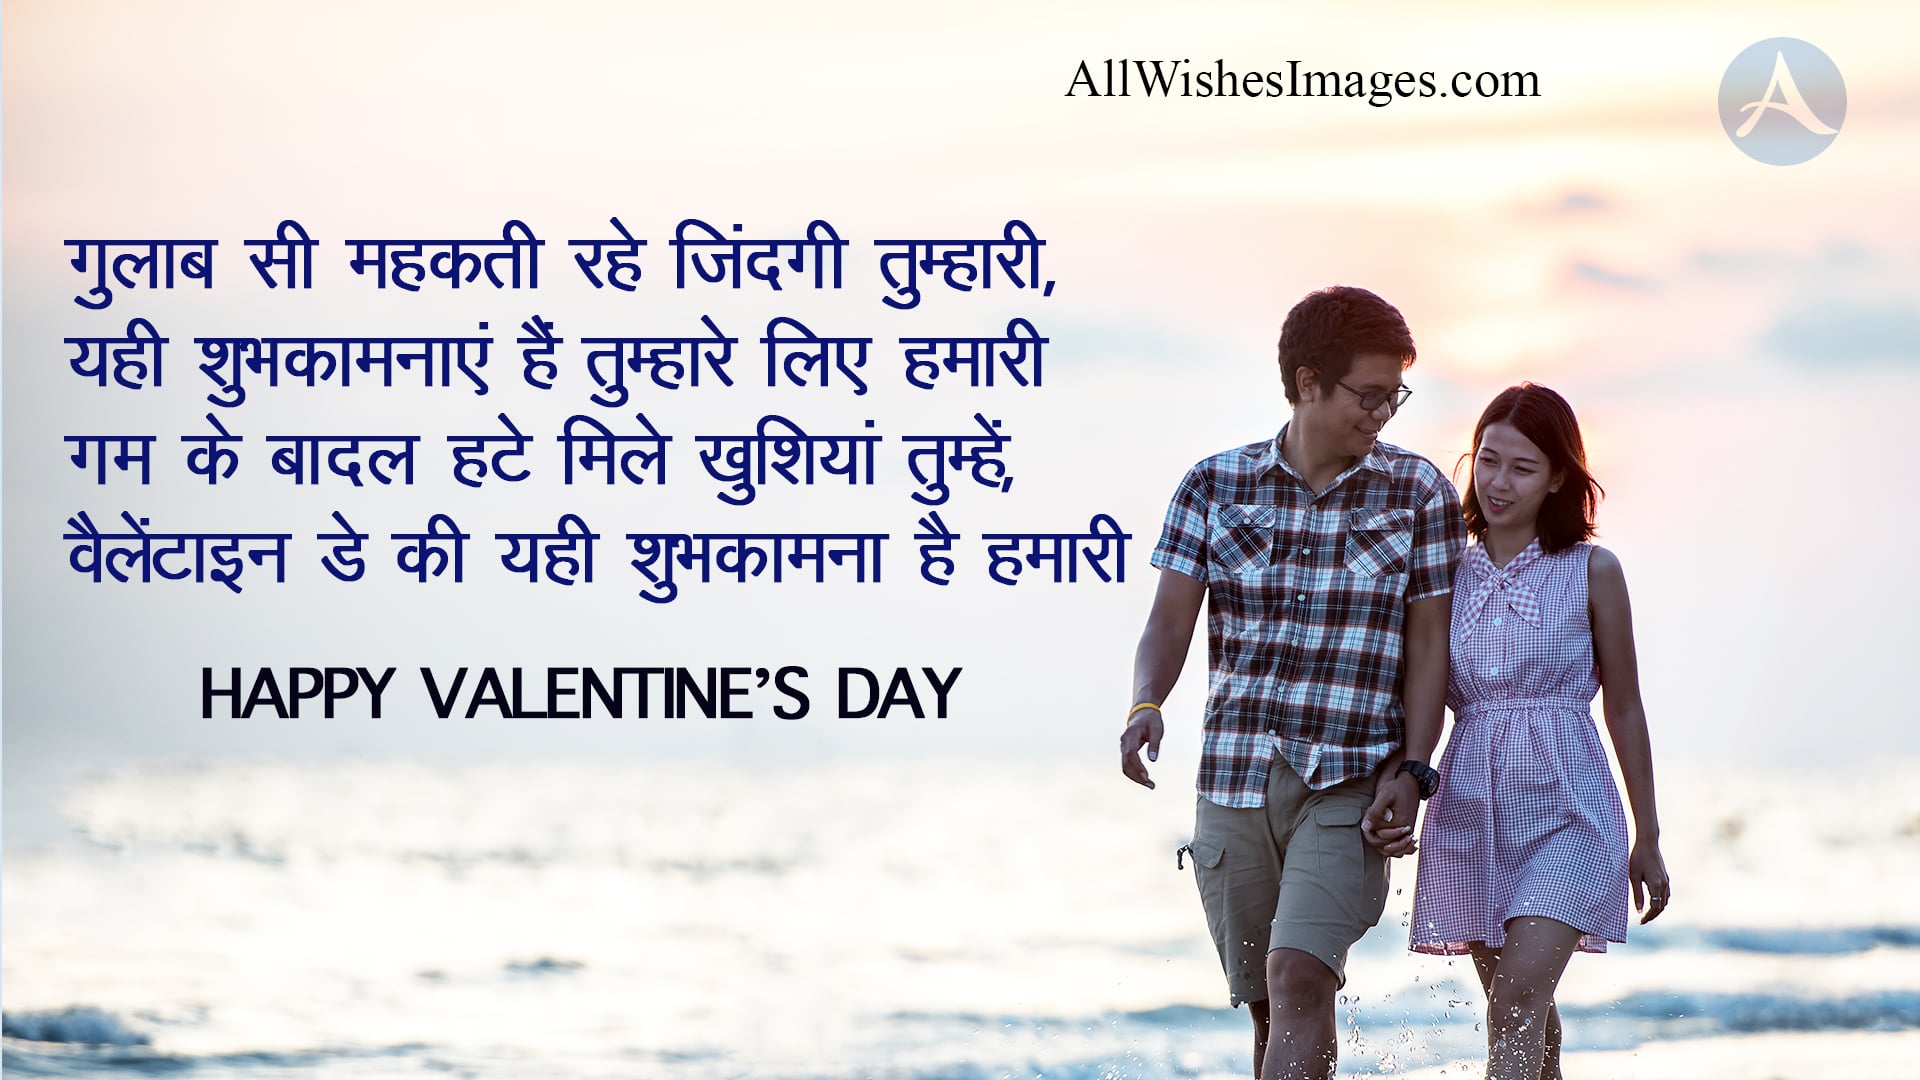 Happy Valentine Day Shayari Image - All Wishes Images - Images for WhatsApp